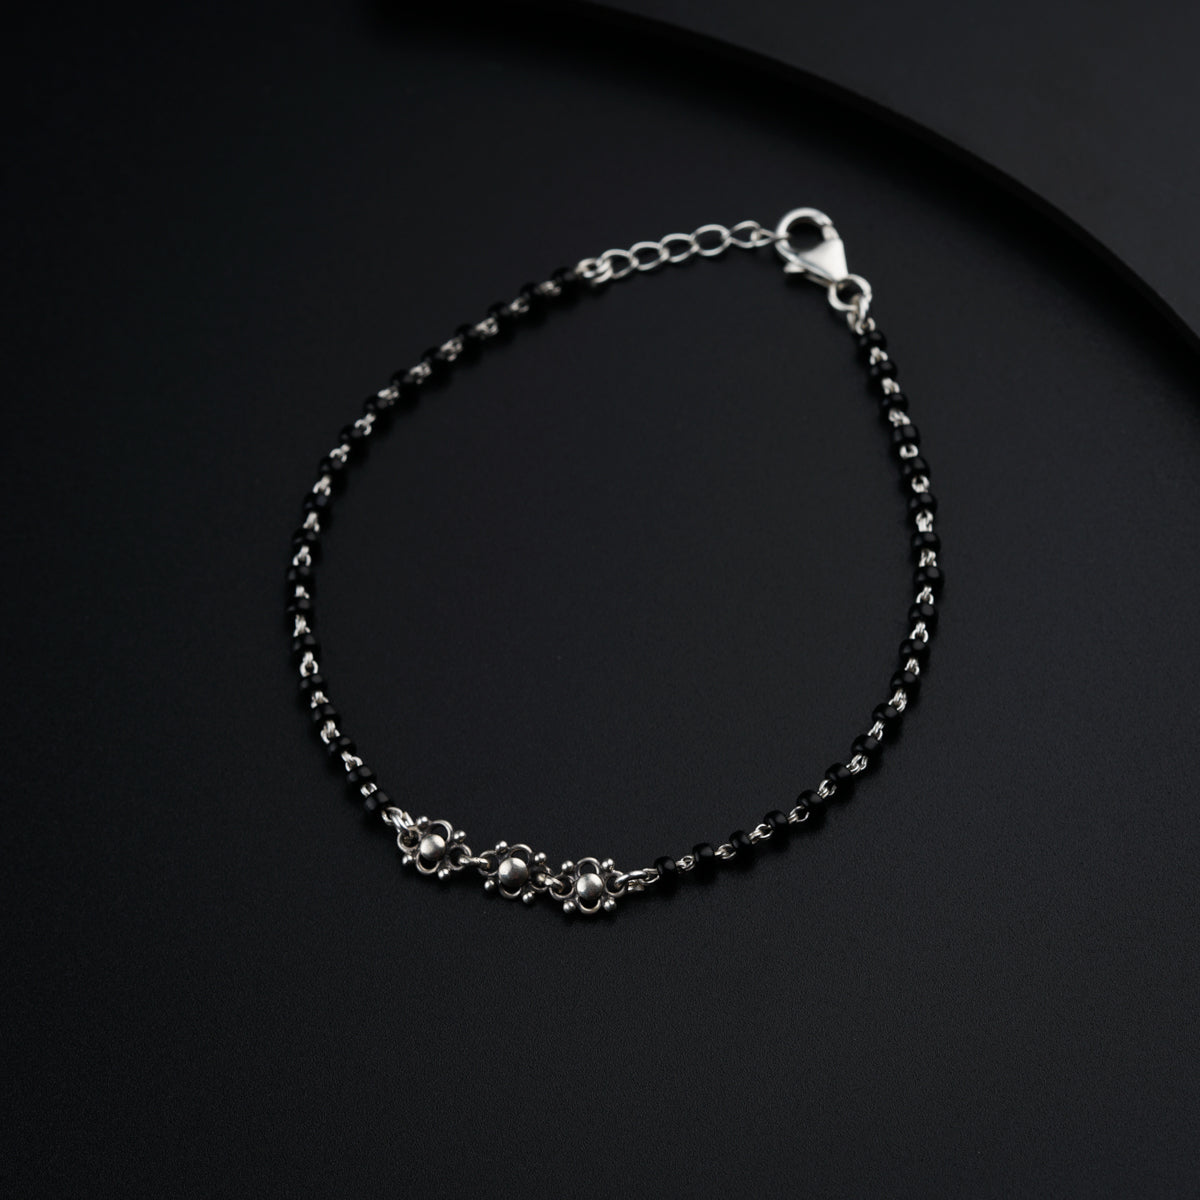 Mangalsutra Bracelet with Flower Chain